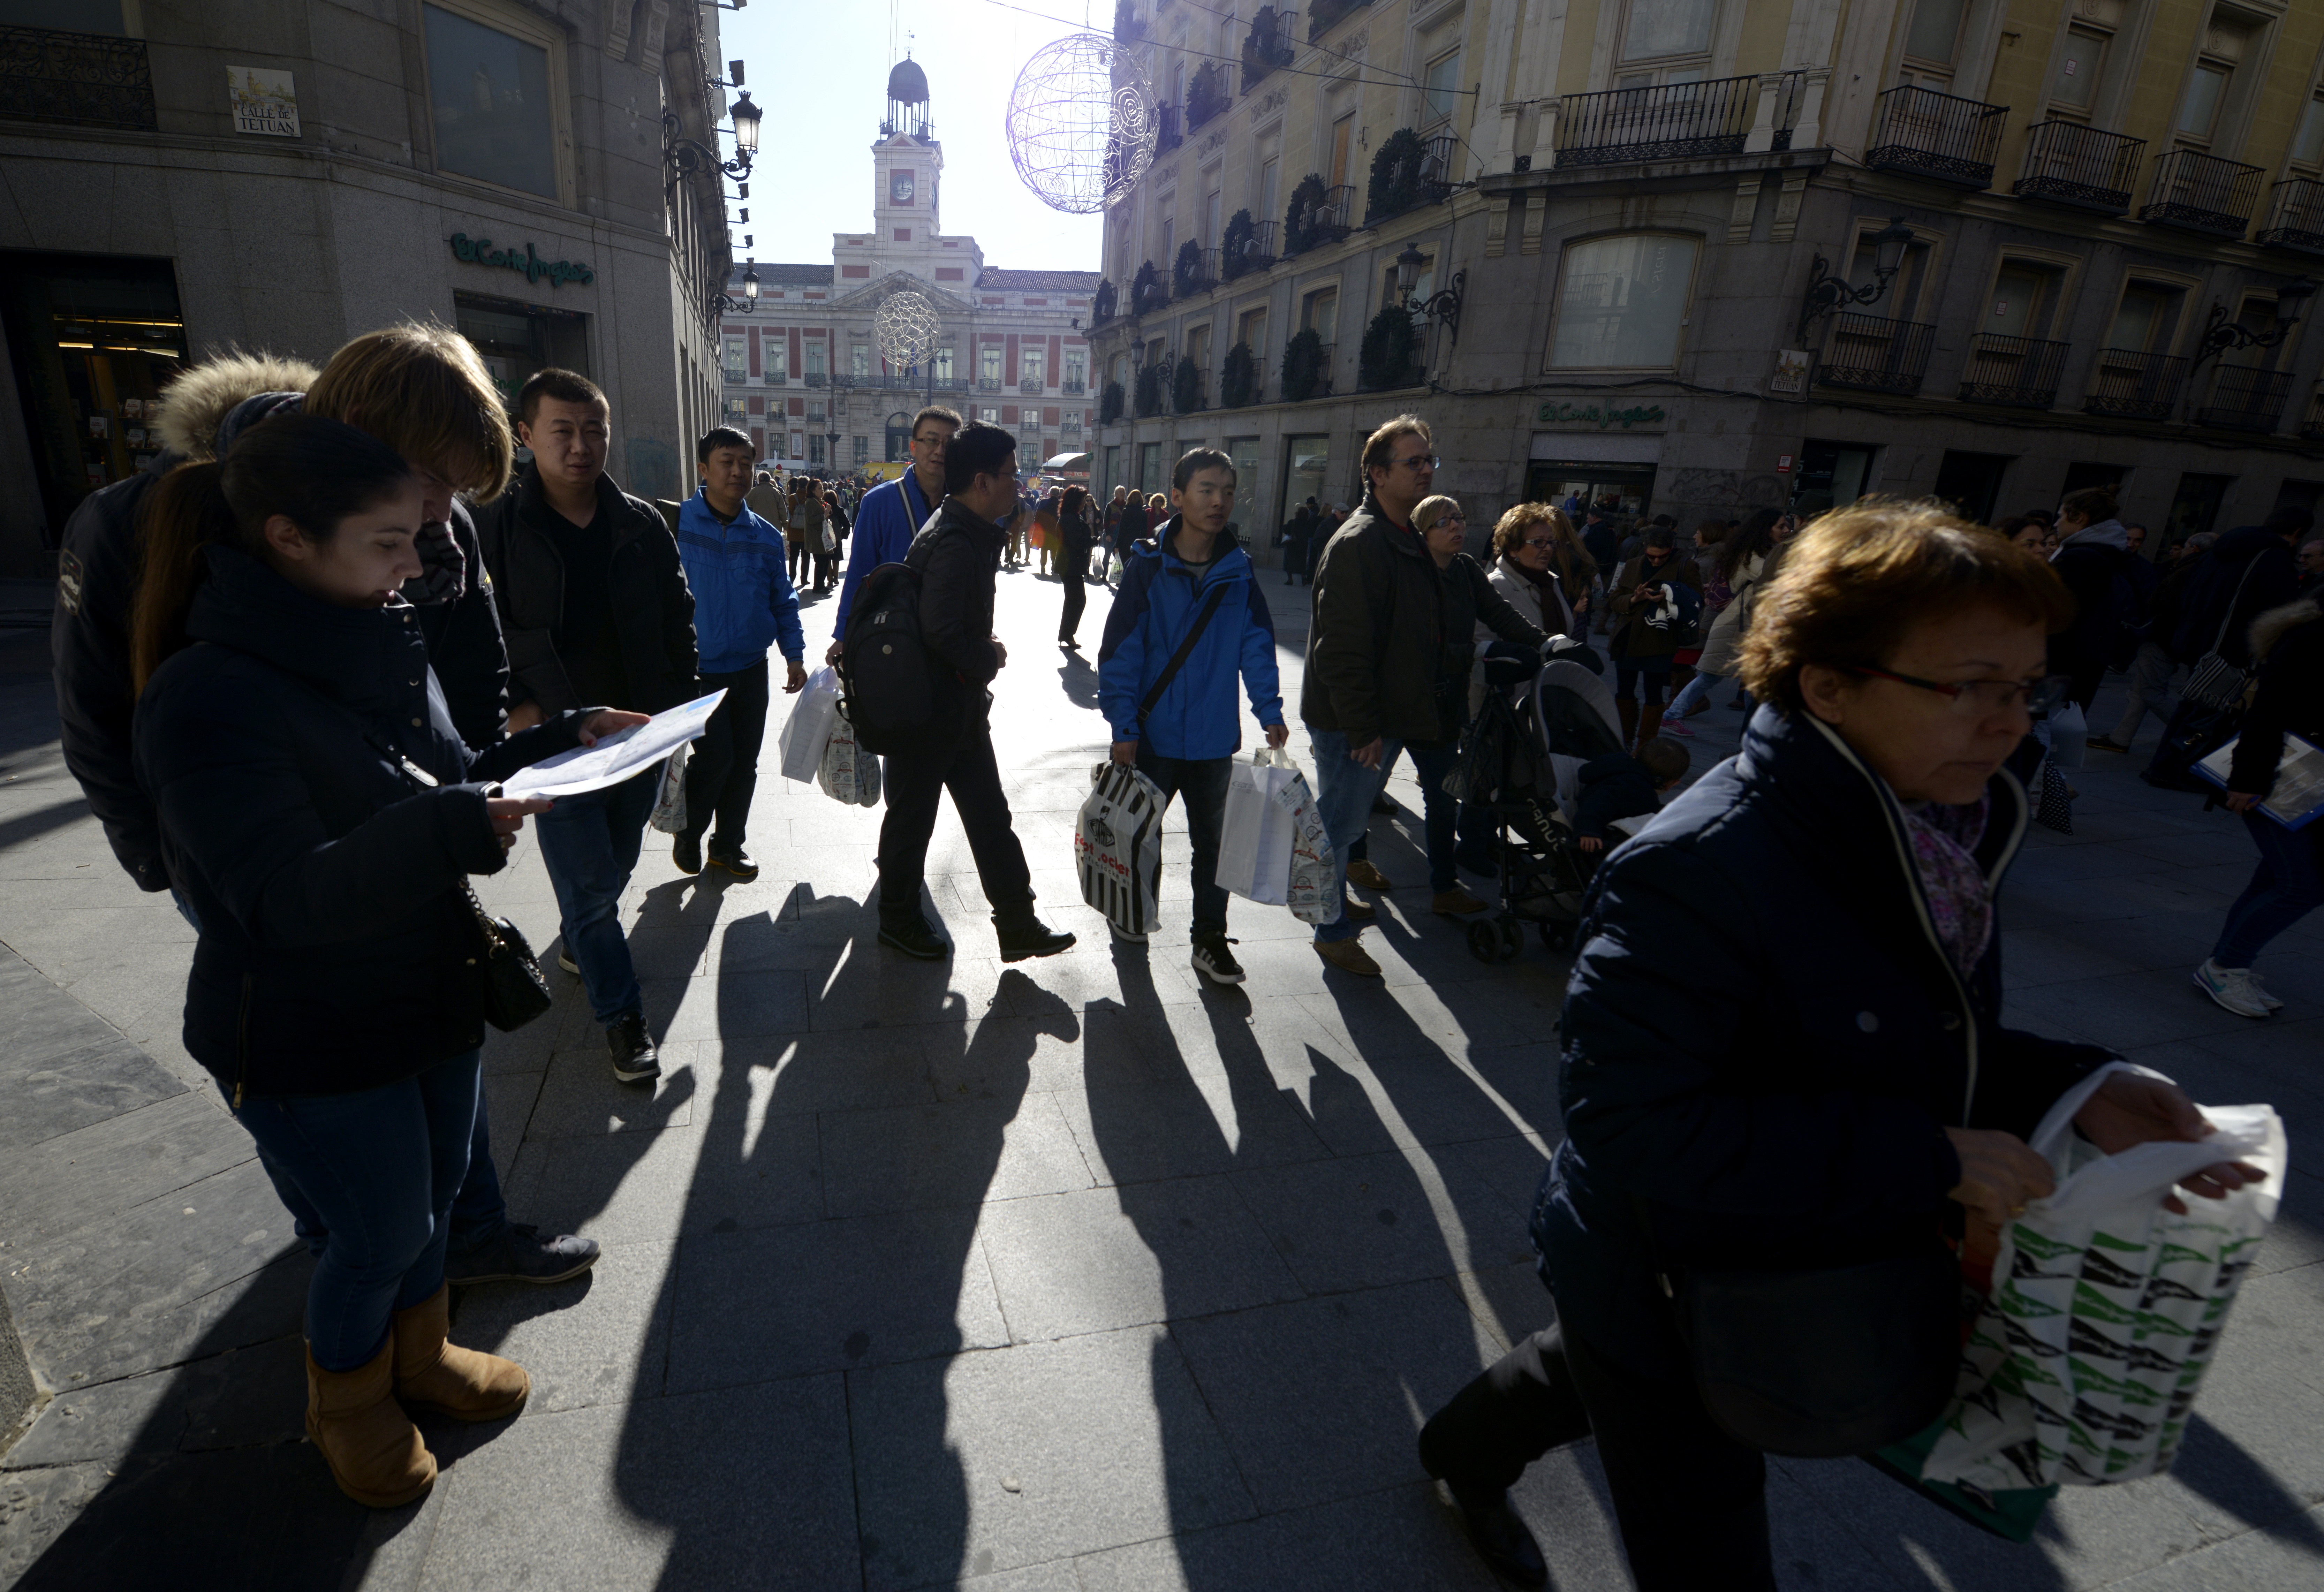 Tourists and city-dwellers carrying shopping bags walk along a paved street near Puerta del Sol in Madrid on December 16 , 2014.  AFP PHOTO/ GERARD JULIEN / AFP PHOTO / GERARD JULIEN